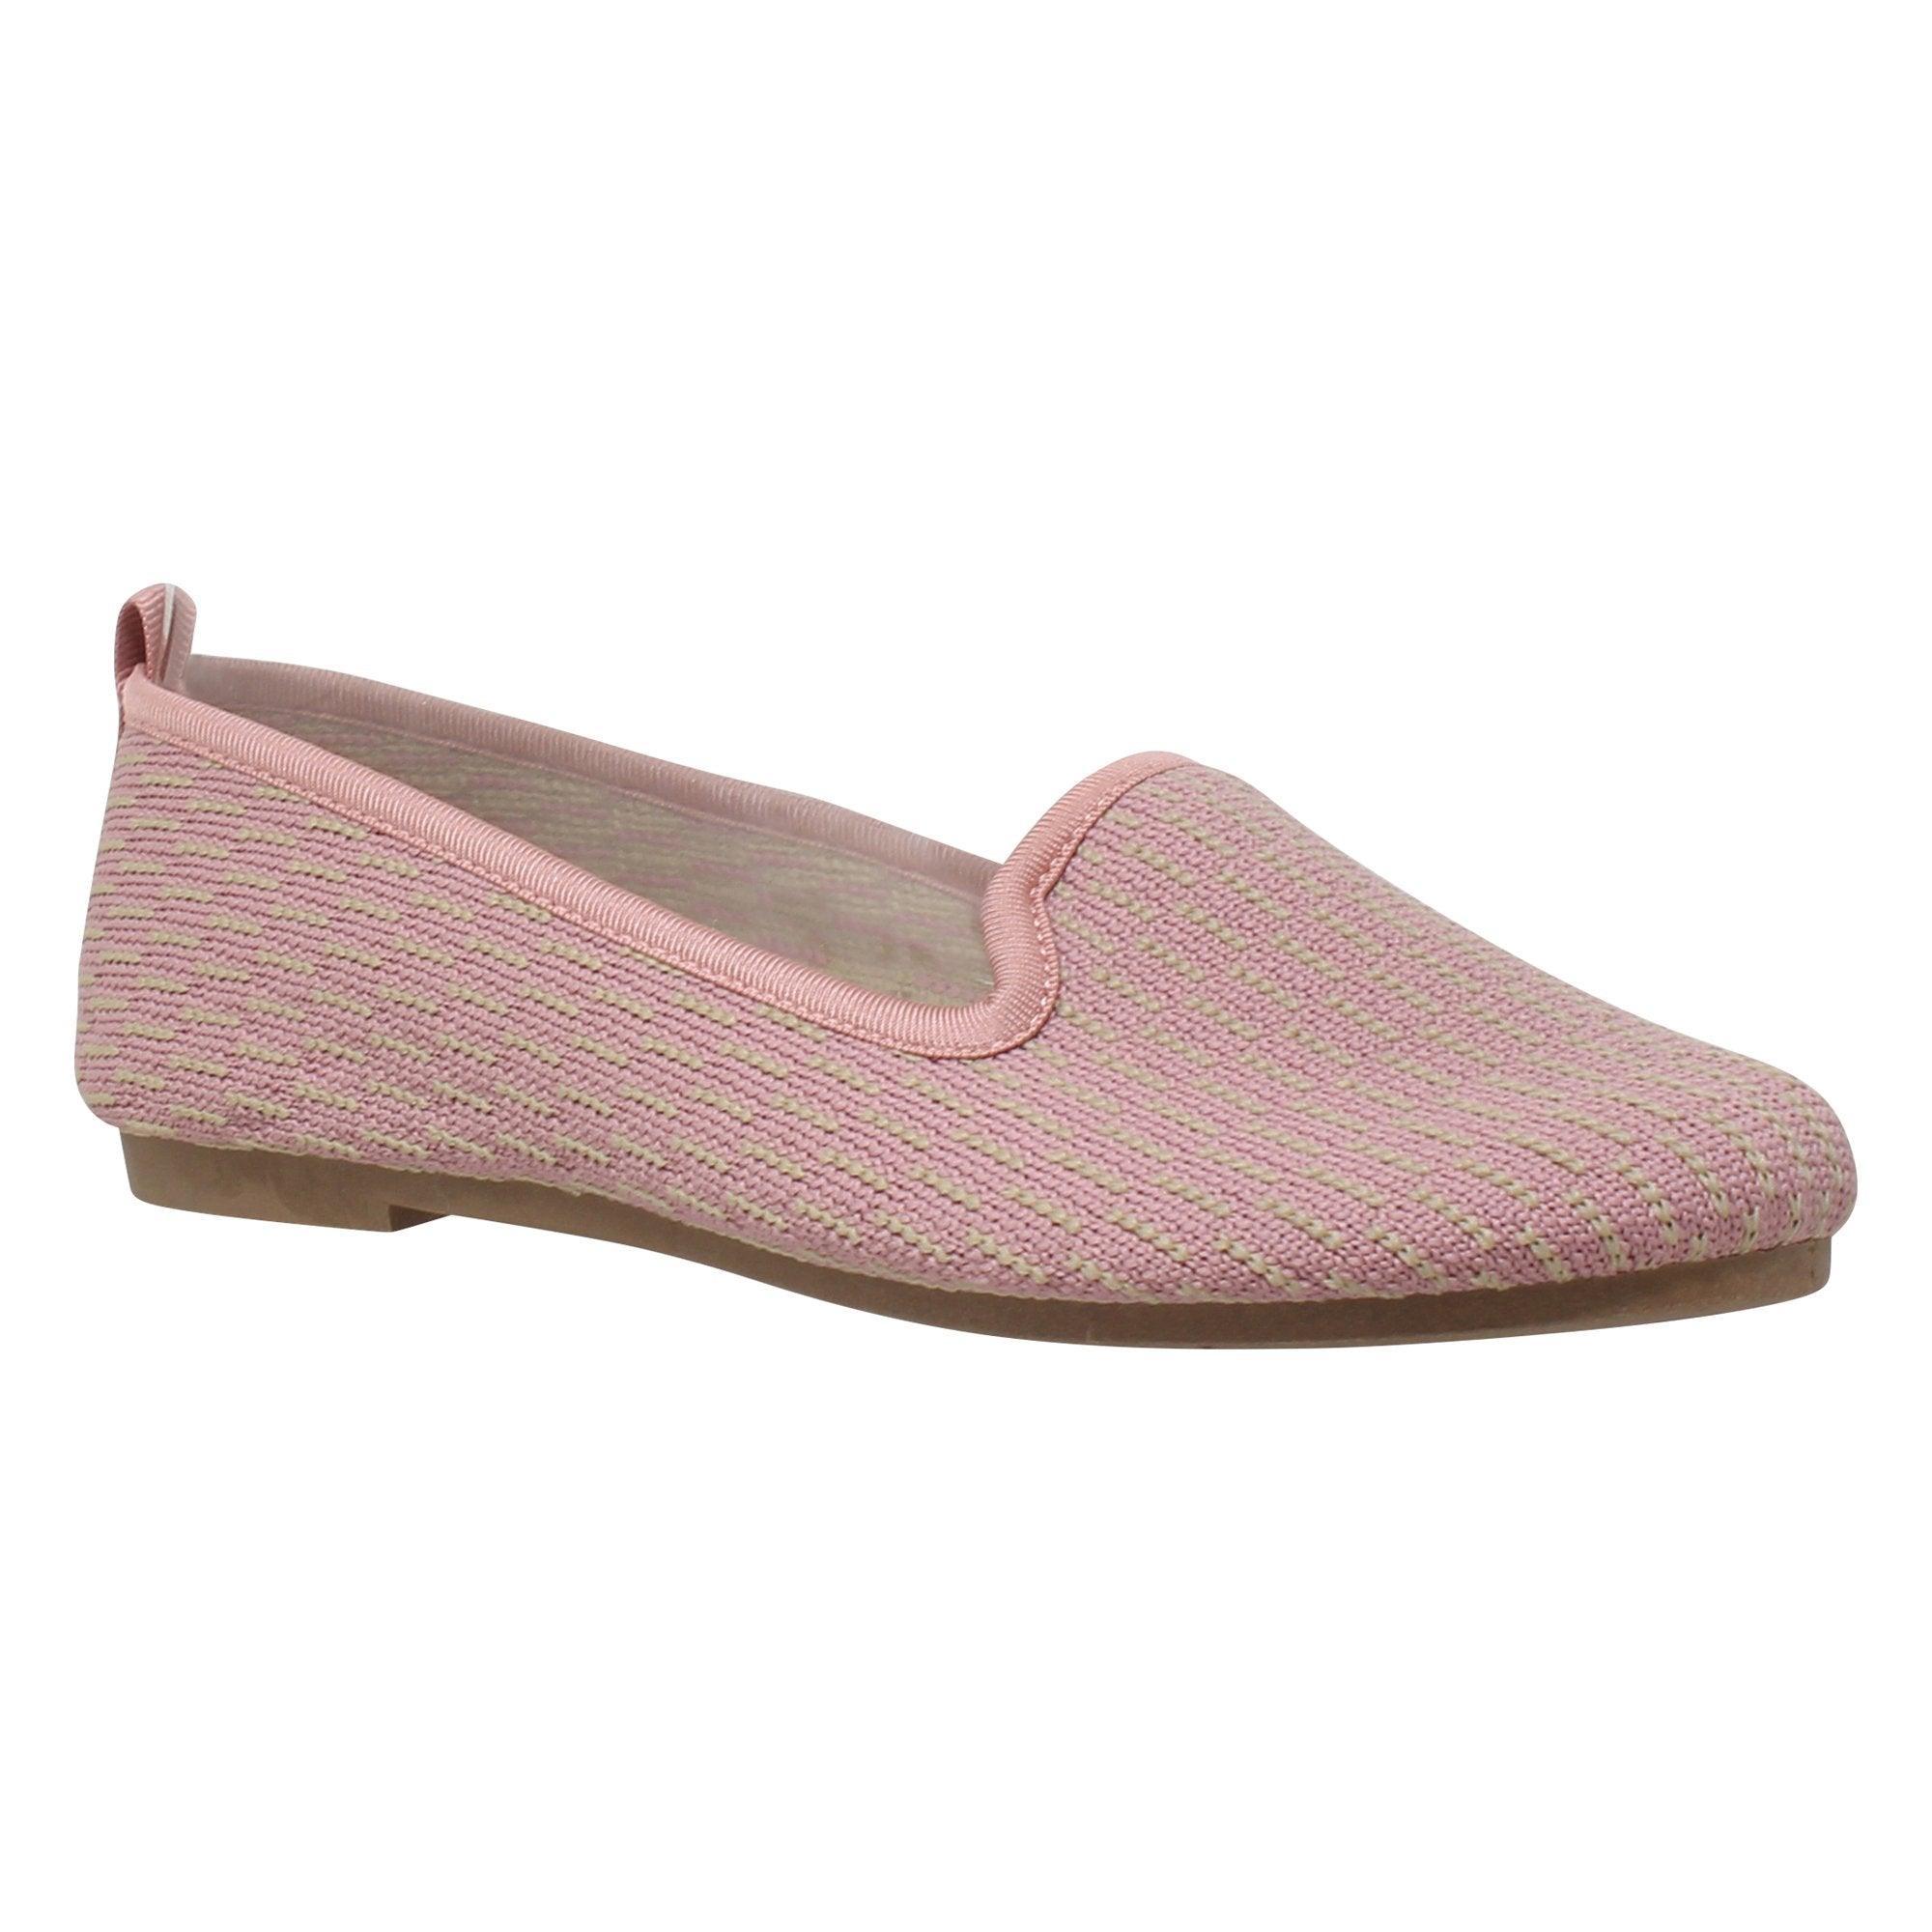 Women's Shoes - Flats Womens Ballet Flats Sweater Soft Rubber Sole Shoes Pink Suede